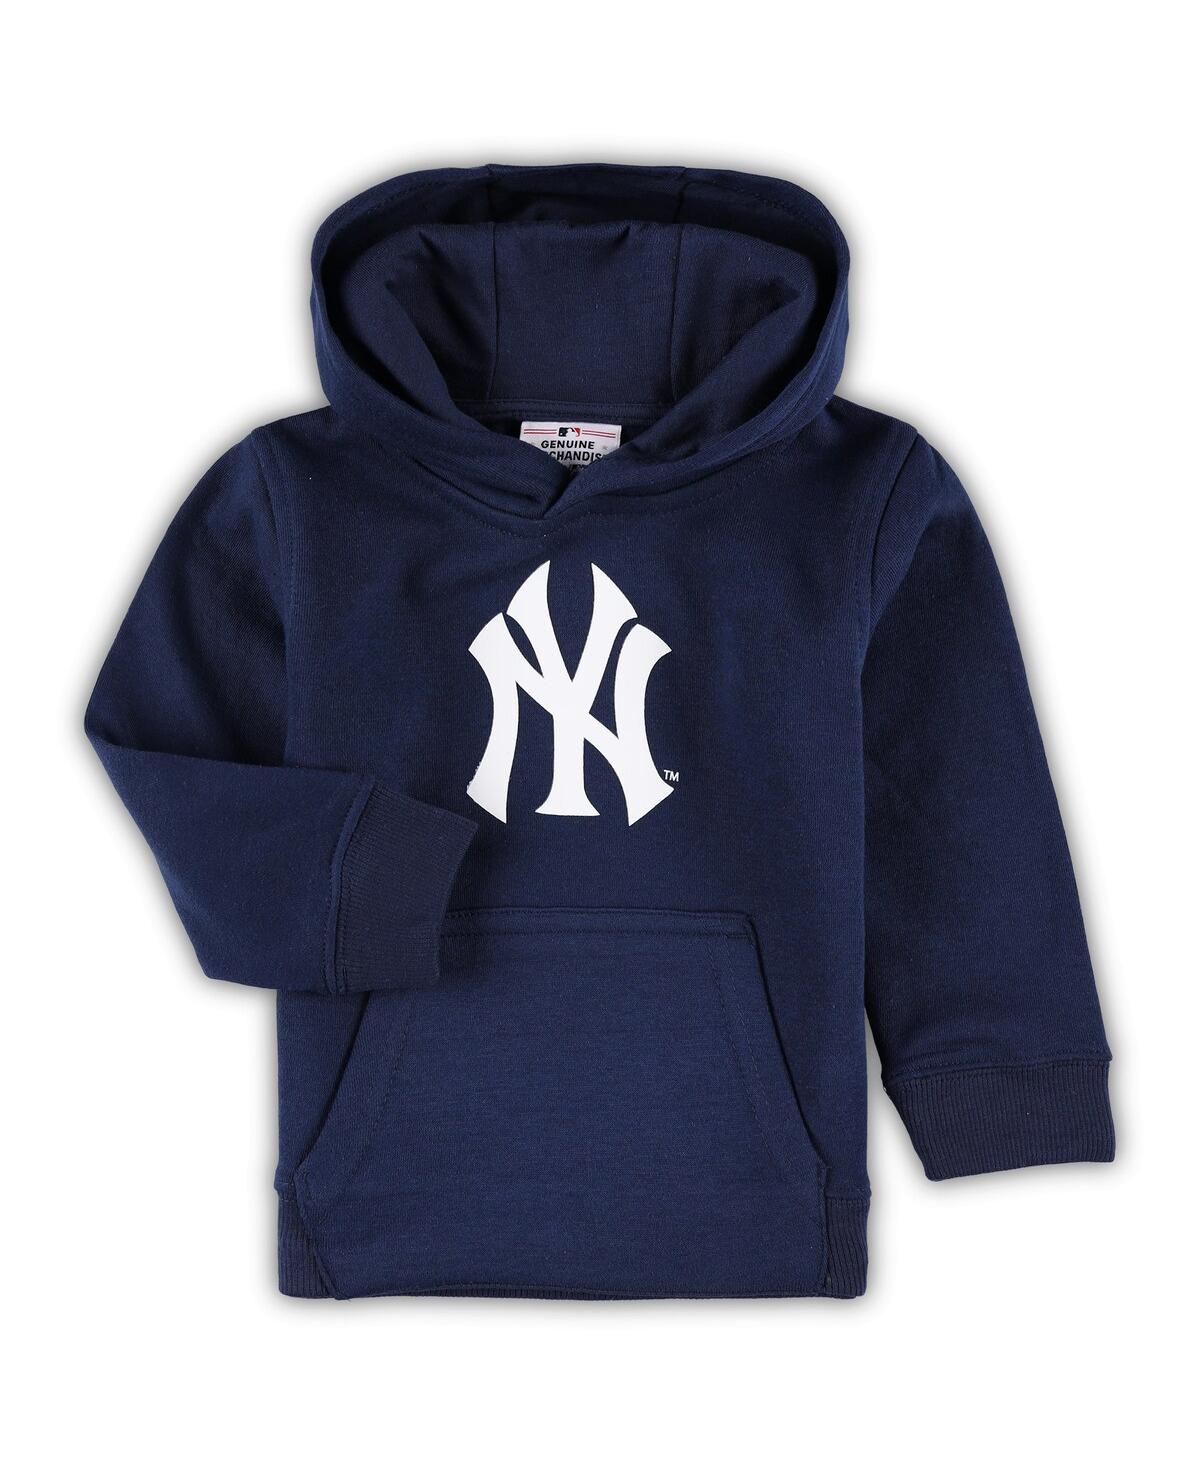 Outerstuff Babies' Toddler Boys And Girls Navy New York Yankees Team Primary Logo Fleece Pullover Hoodie